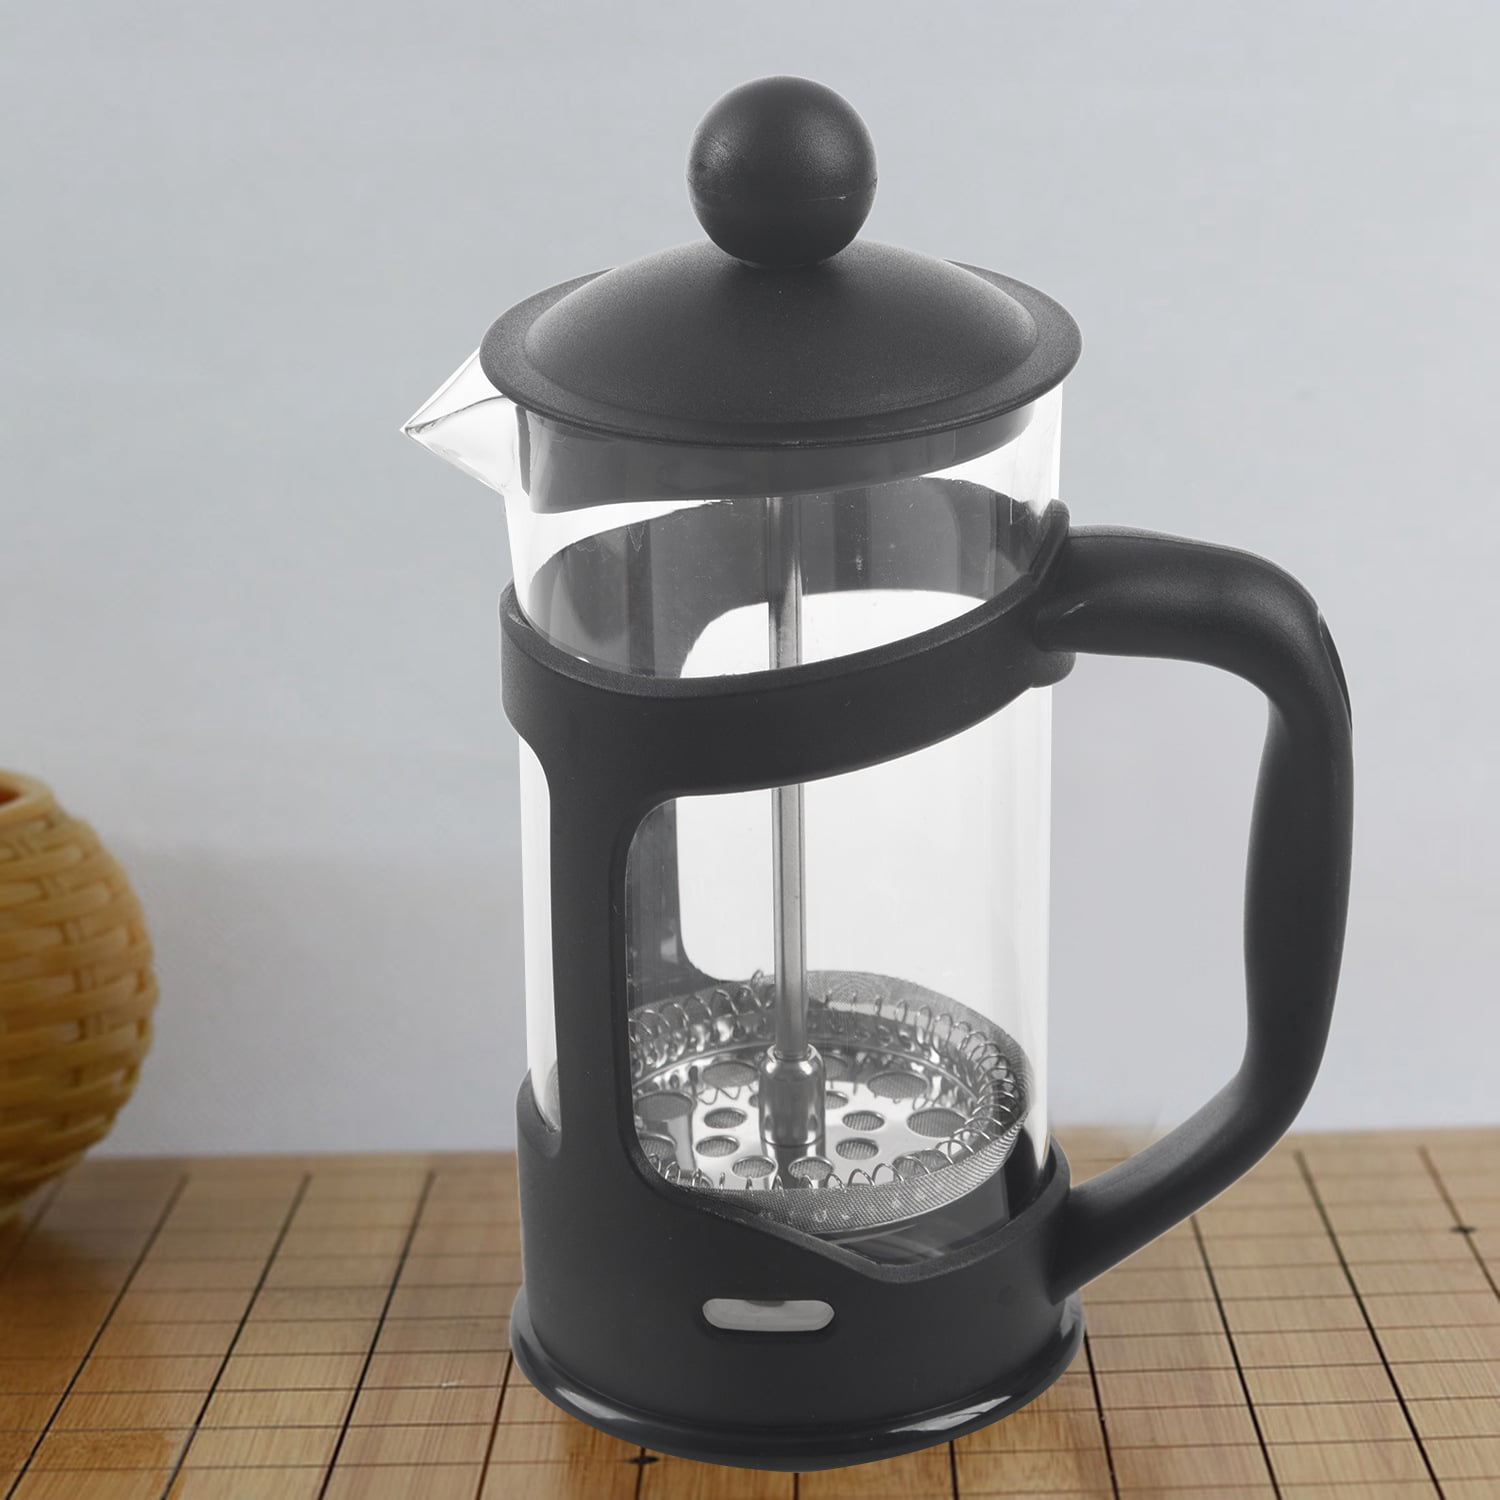 Andifany French Coffee Maker Small French Press Perfect for Morning Coffee Maximum Flavor Coffee Brewer With Superior Filtration 